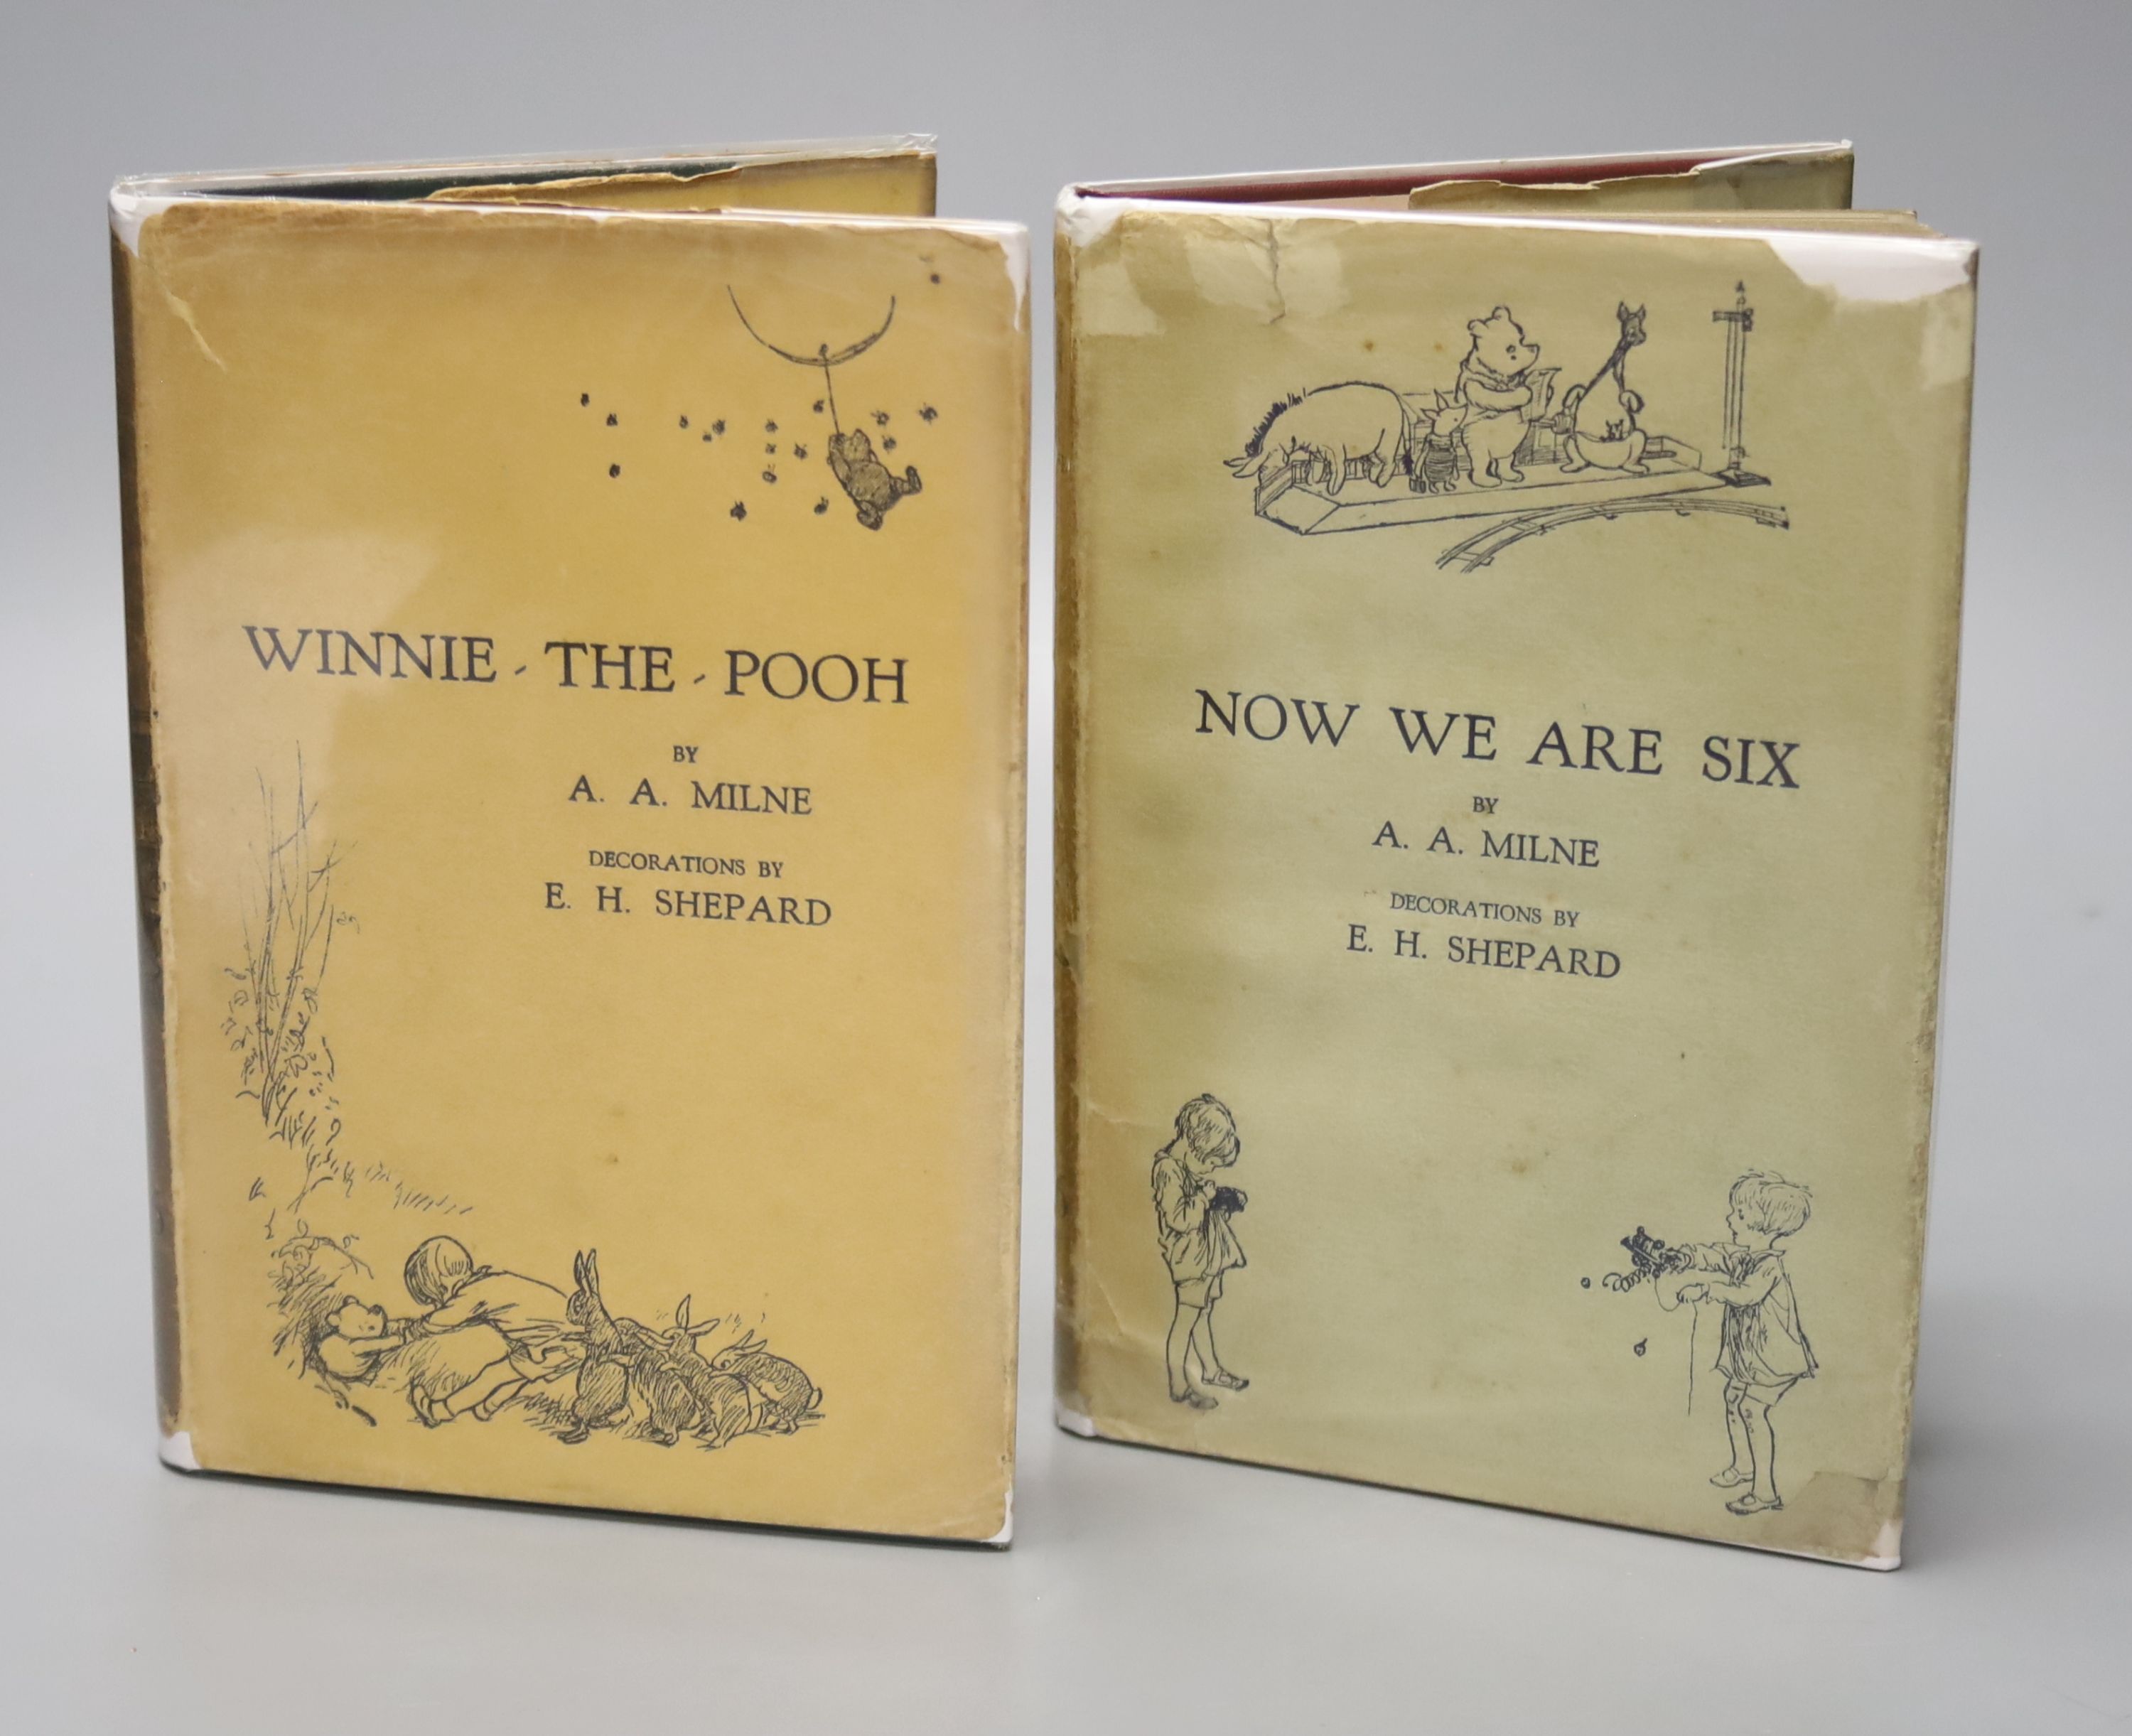 Milne, A.A., 'Winnie The Pooh', 8 vols, (d.j. present, some tears and losses, Methven & Co. Ltd., 2nd edition, together with Milne, A.A. 'Now We Are Six', 8 vols (d.j. present, some minor tears and losses, Methven & Co.,